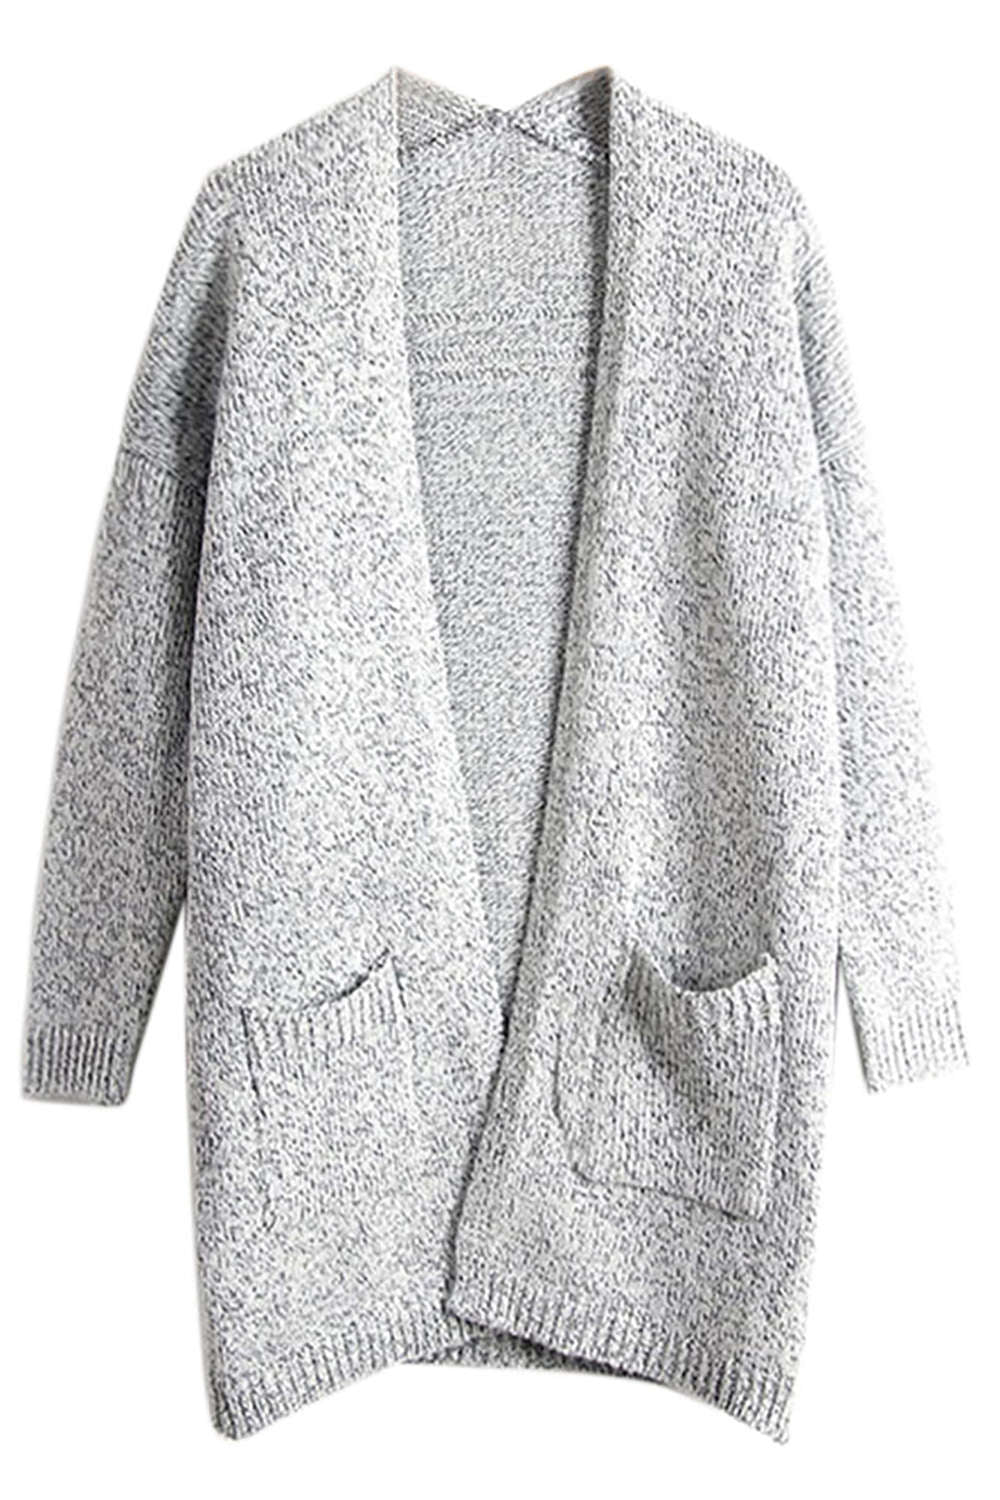 Iyasson Women's Knitted Open Front Cardigan Sweater